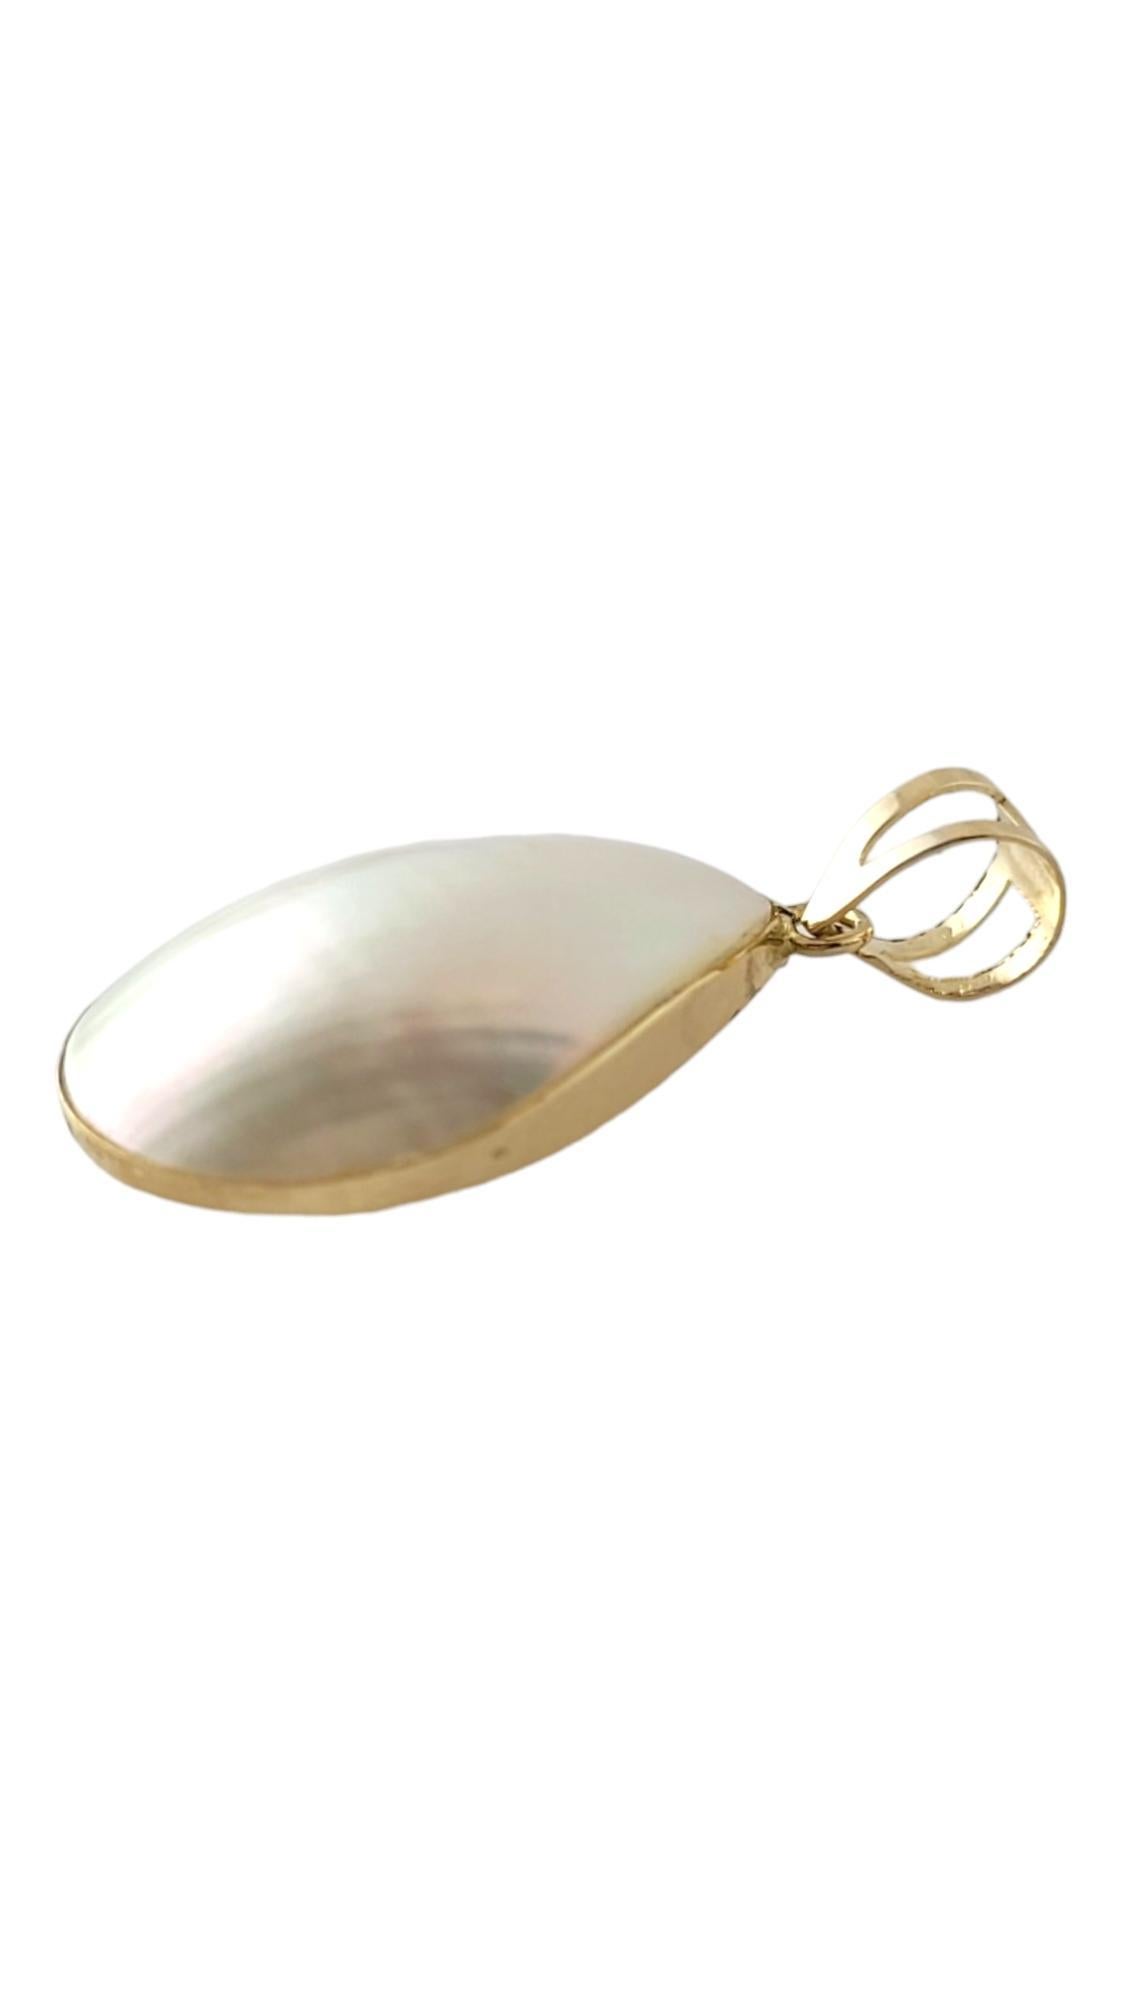 14K Yellow Gold Mabe Pearl Pendant #16897

This gorgeous pendant features a beautiful Mabe pearl set 14K yellow gold for a breathtaking finish!

Size: 21.85mm X 13.13mm 
Length w/ bail: 26.62mm

Weight: 1.2 dwt/ 1.9 g

Hallmark: 14K 585

Very good